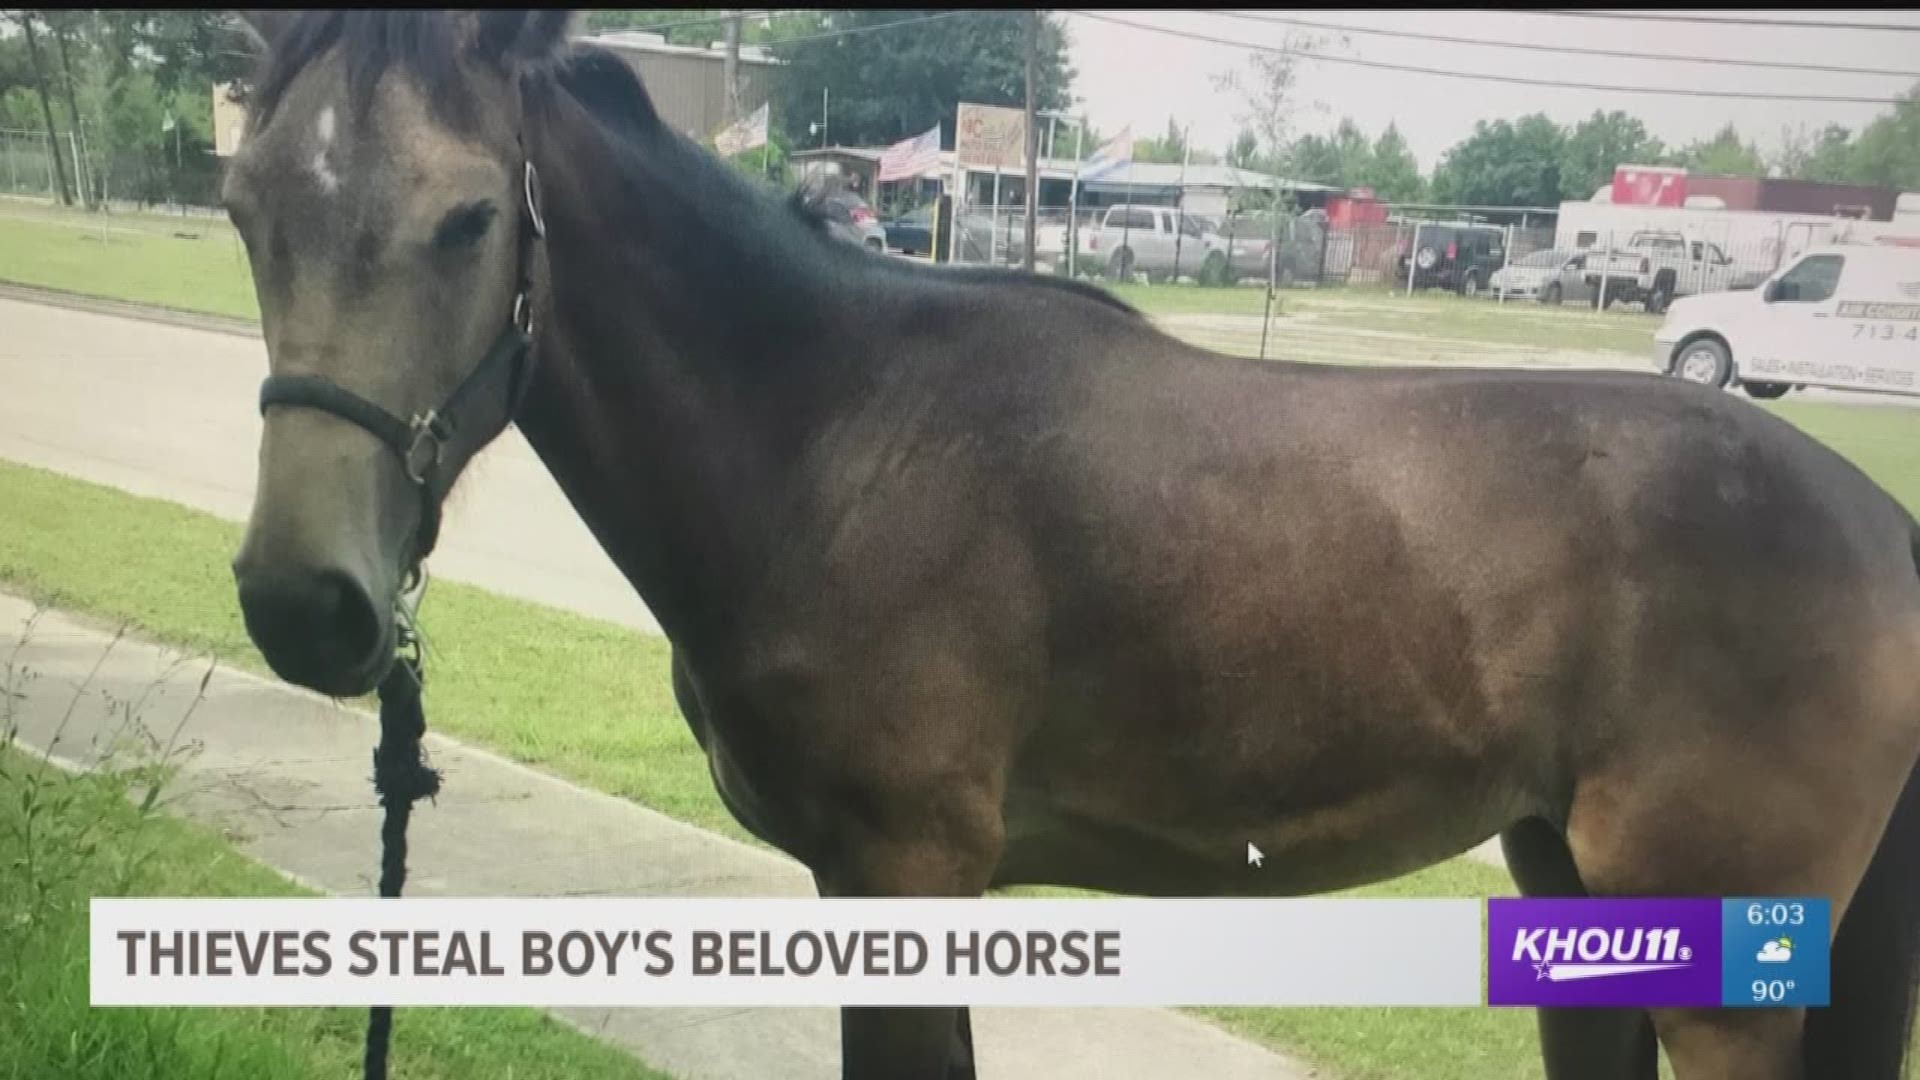 Search on for stolen horse
Mom of murdered woman sues Montgomery county motel
Back to school weather forecast

